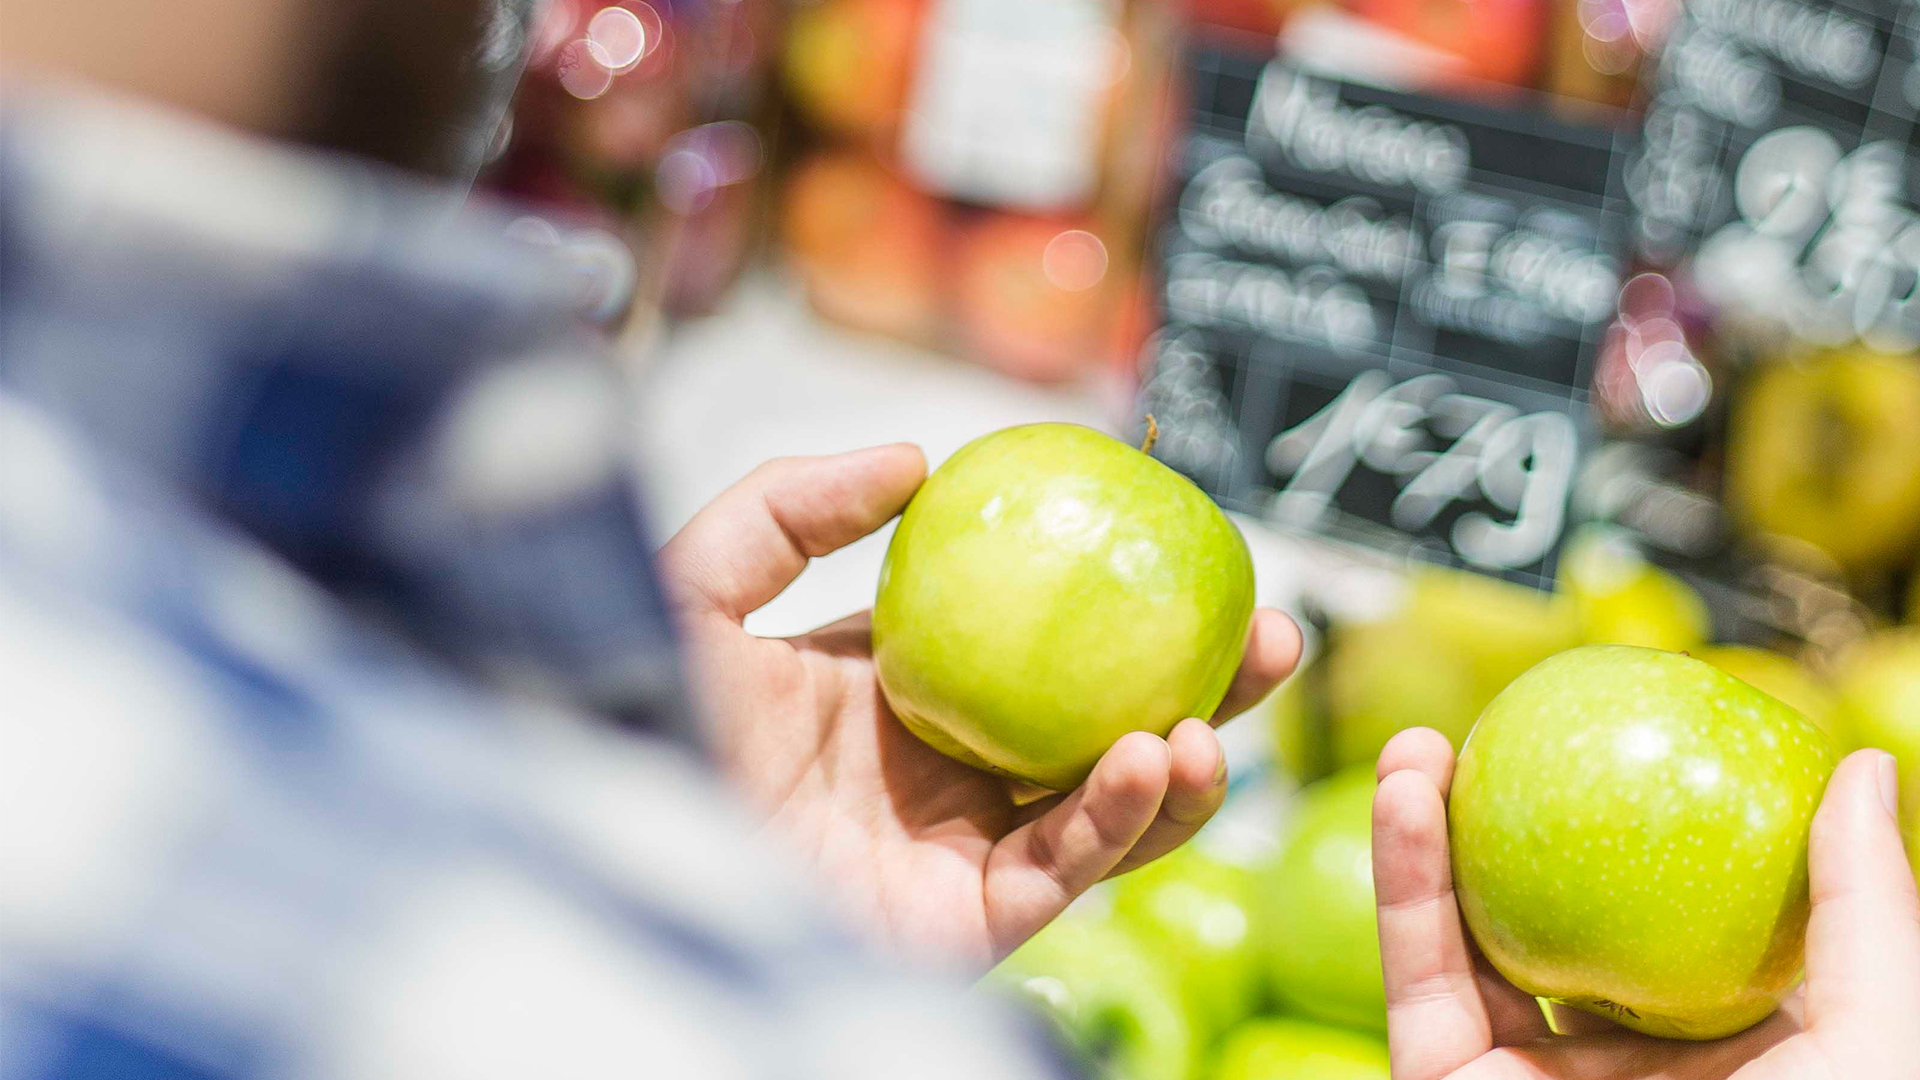 Grocers could face a tough time in the coming year